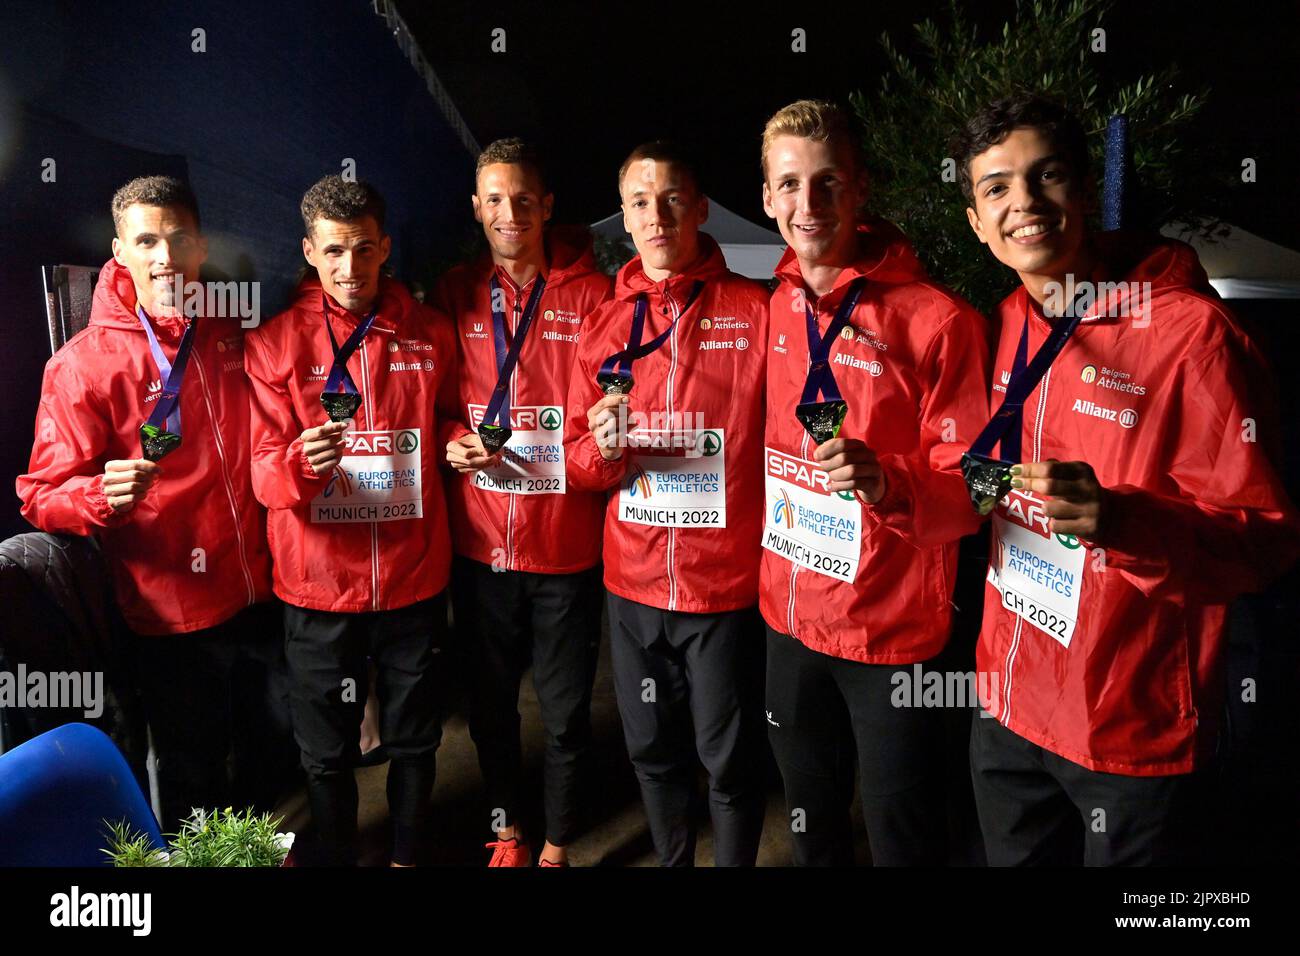 L-R, Belgian Jonathan Borlee, Belgian Kevin Borlee, Belgian Dylan Borlee, Belgian Julien Watrin, Belgian Alexander Doom and Belgian Jonathan Sacoor pose with their silver medal after the podium of the men's 4x400m relay race at the European Championships athletics, at Munich 2022, Germany, on Saturday 20 August 2022. The second edition of the European Championships takes place from 11 to 22 August and features nine sports.  BELGA PHOTO ERIC LALMAND Stock Photo